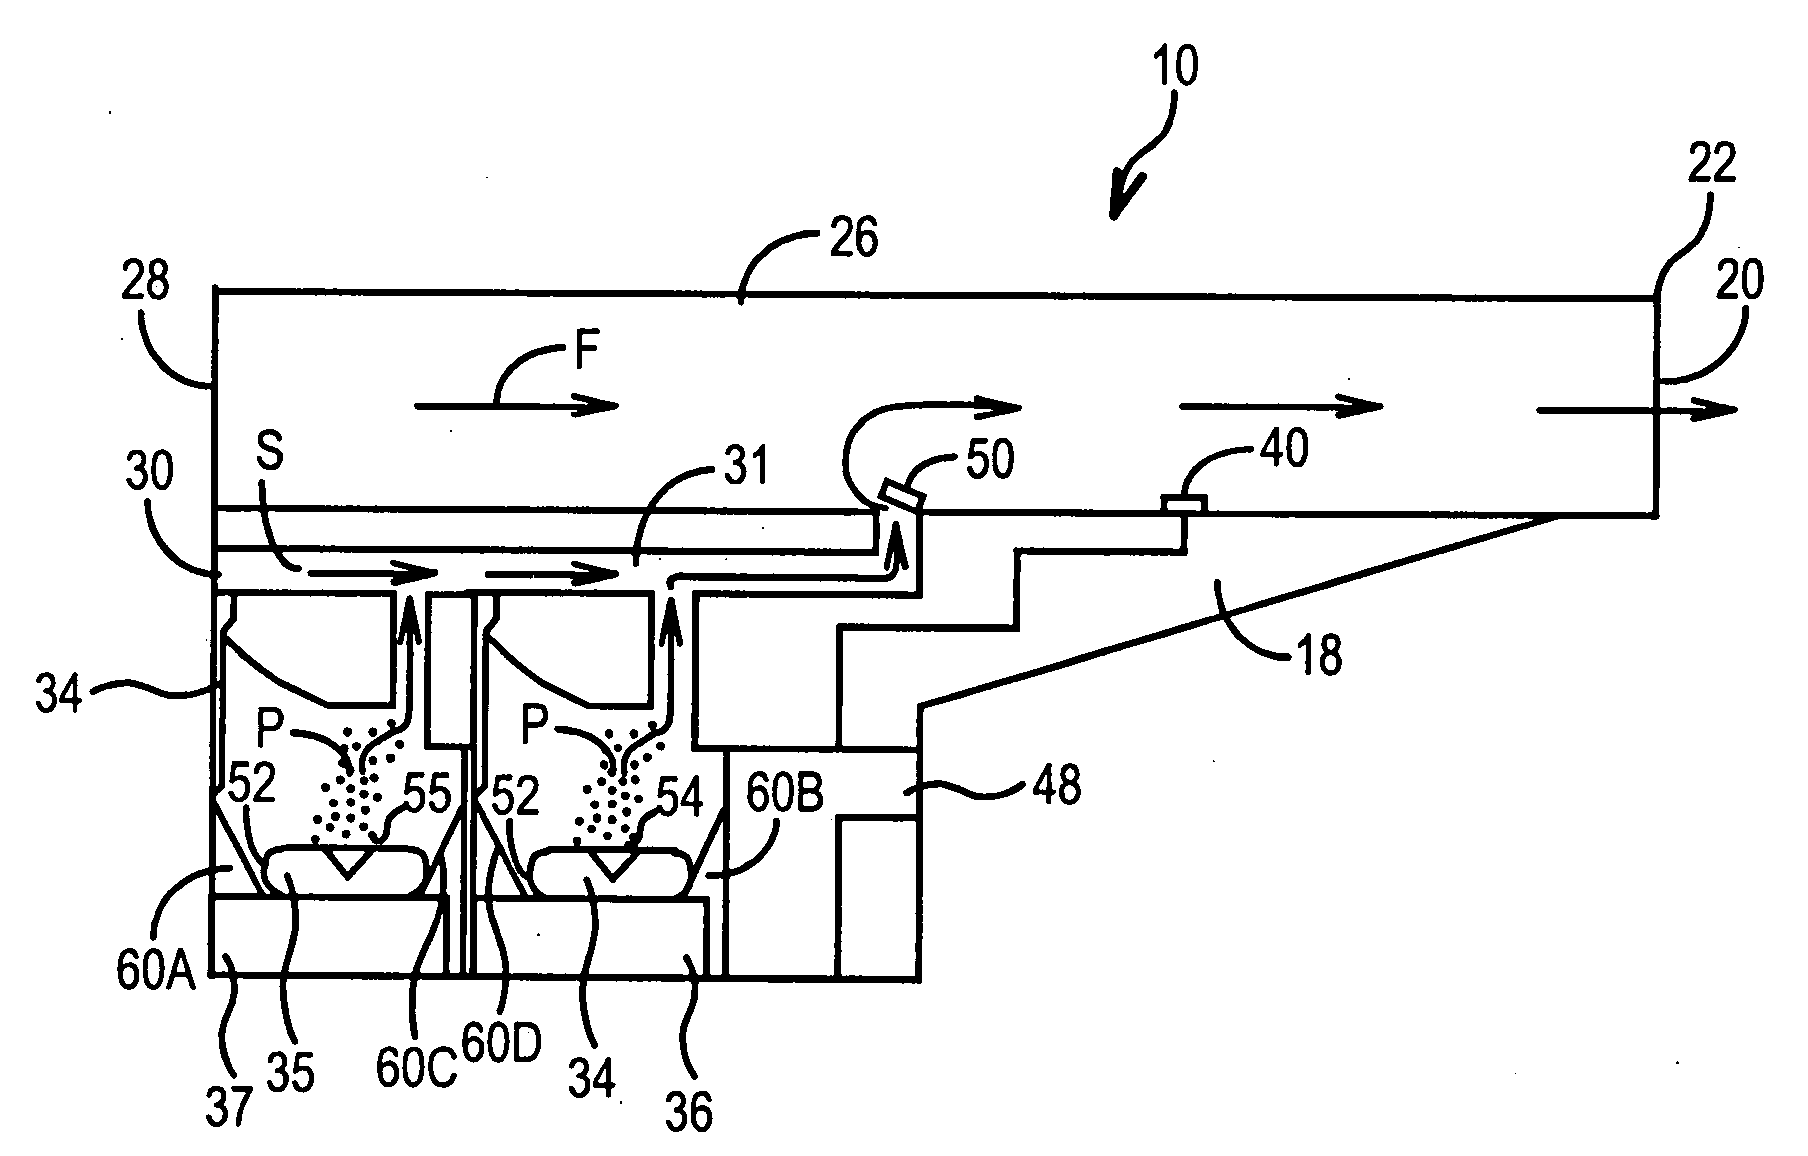 Variable dose inhalation device